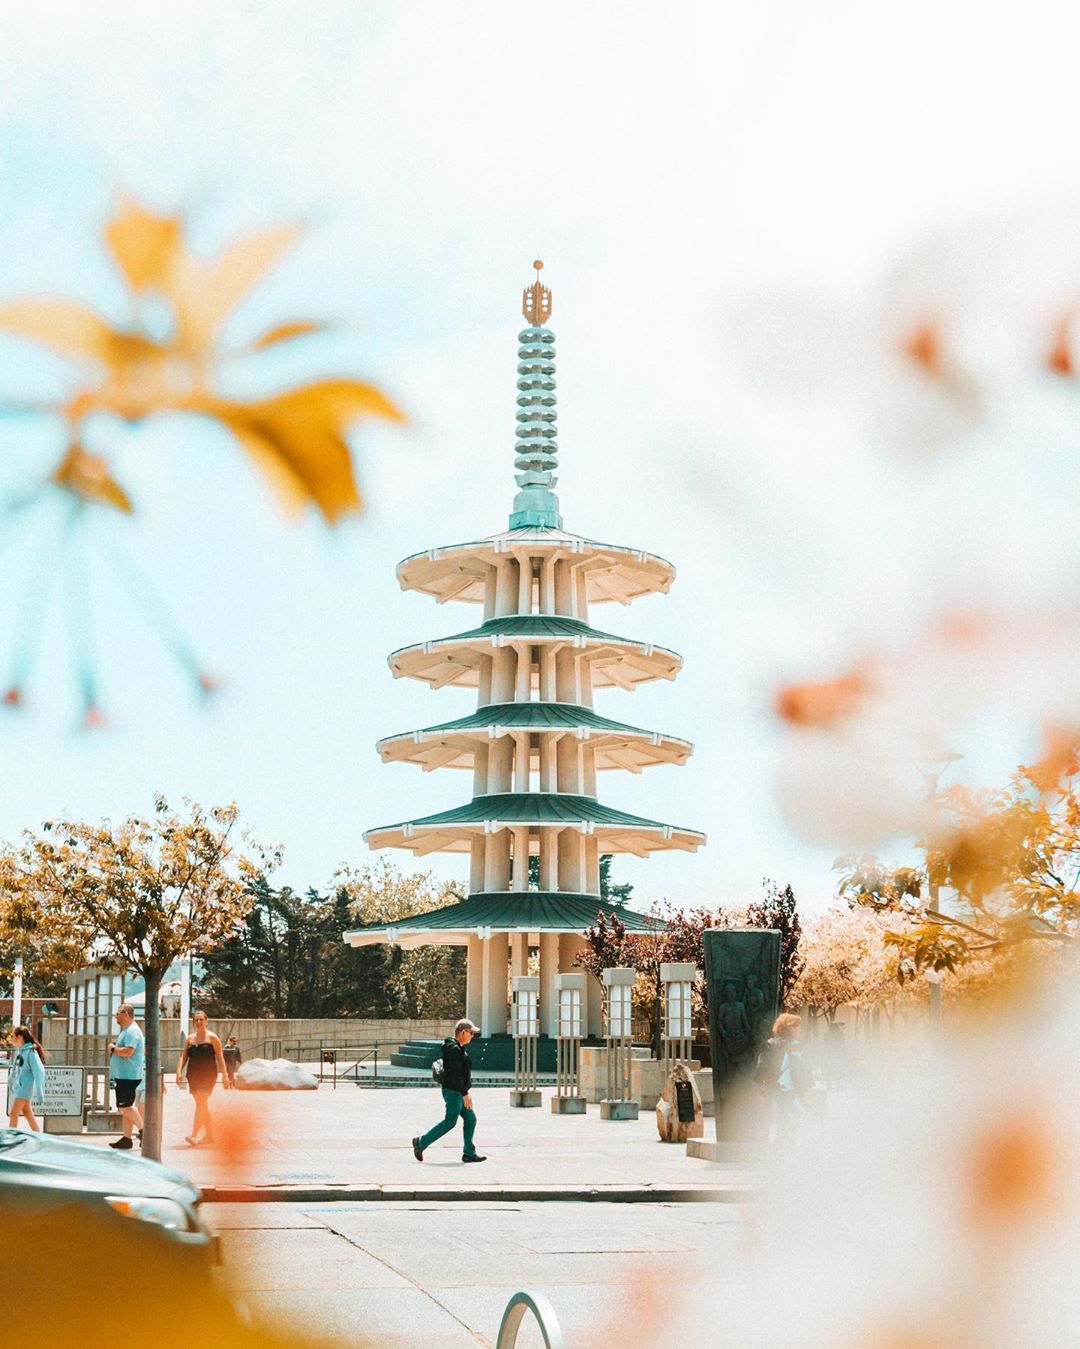 Tower with Japanese architecture in Japantown, San Francisco. Photo by Instagram user @alex_xuu